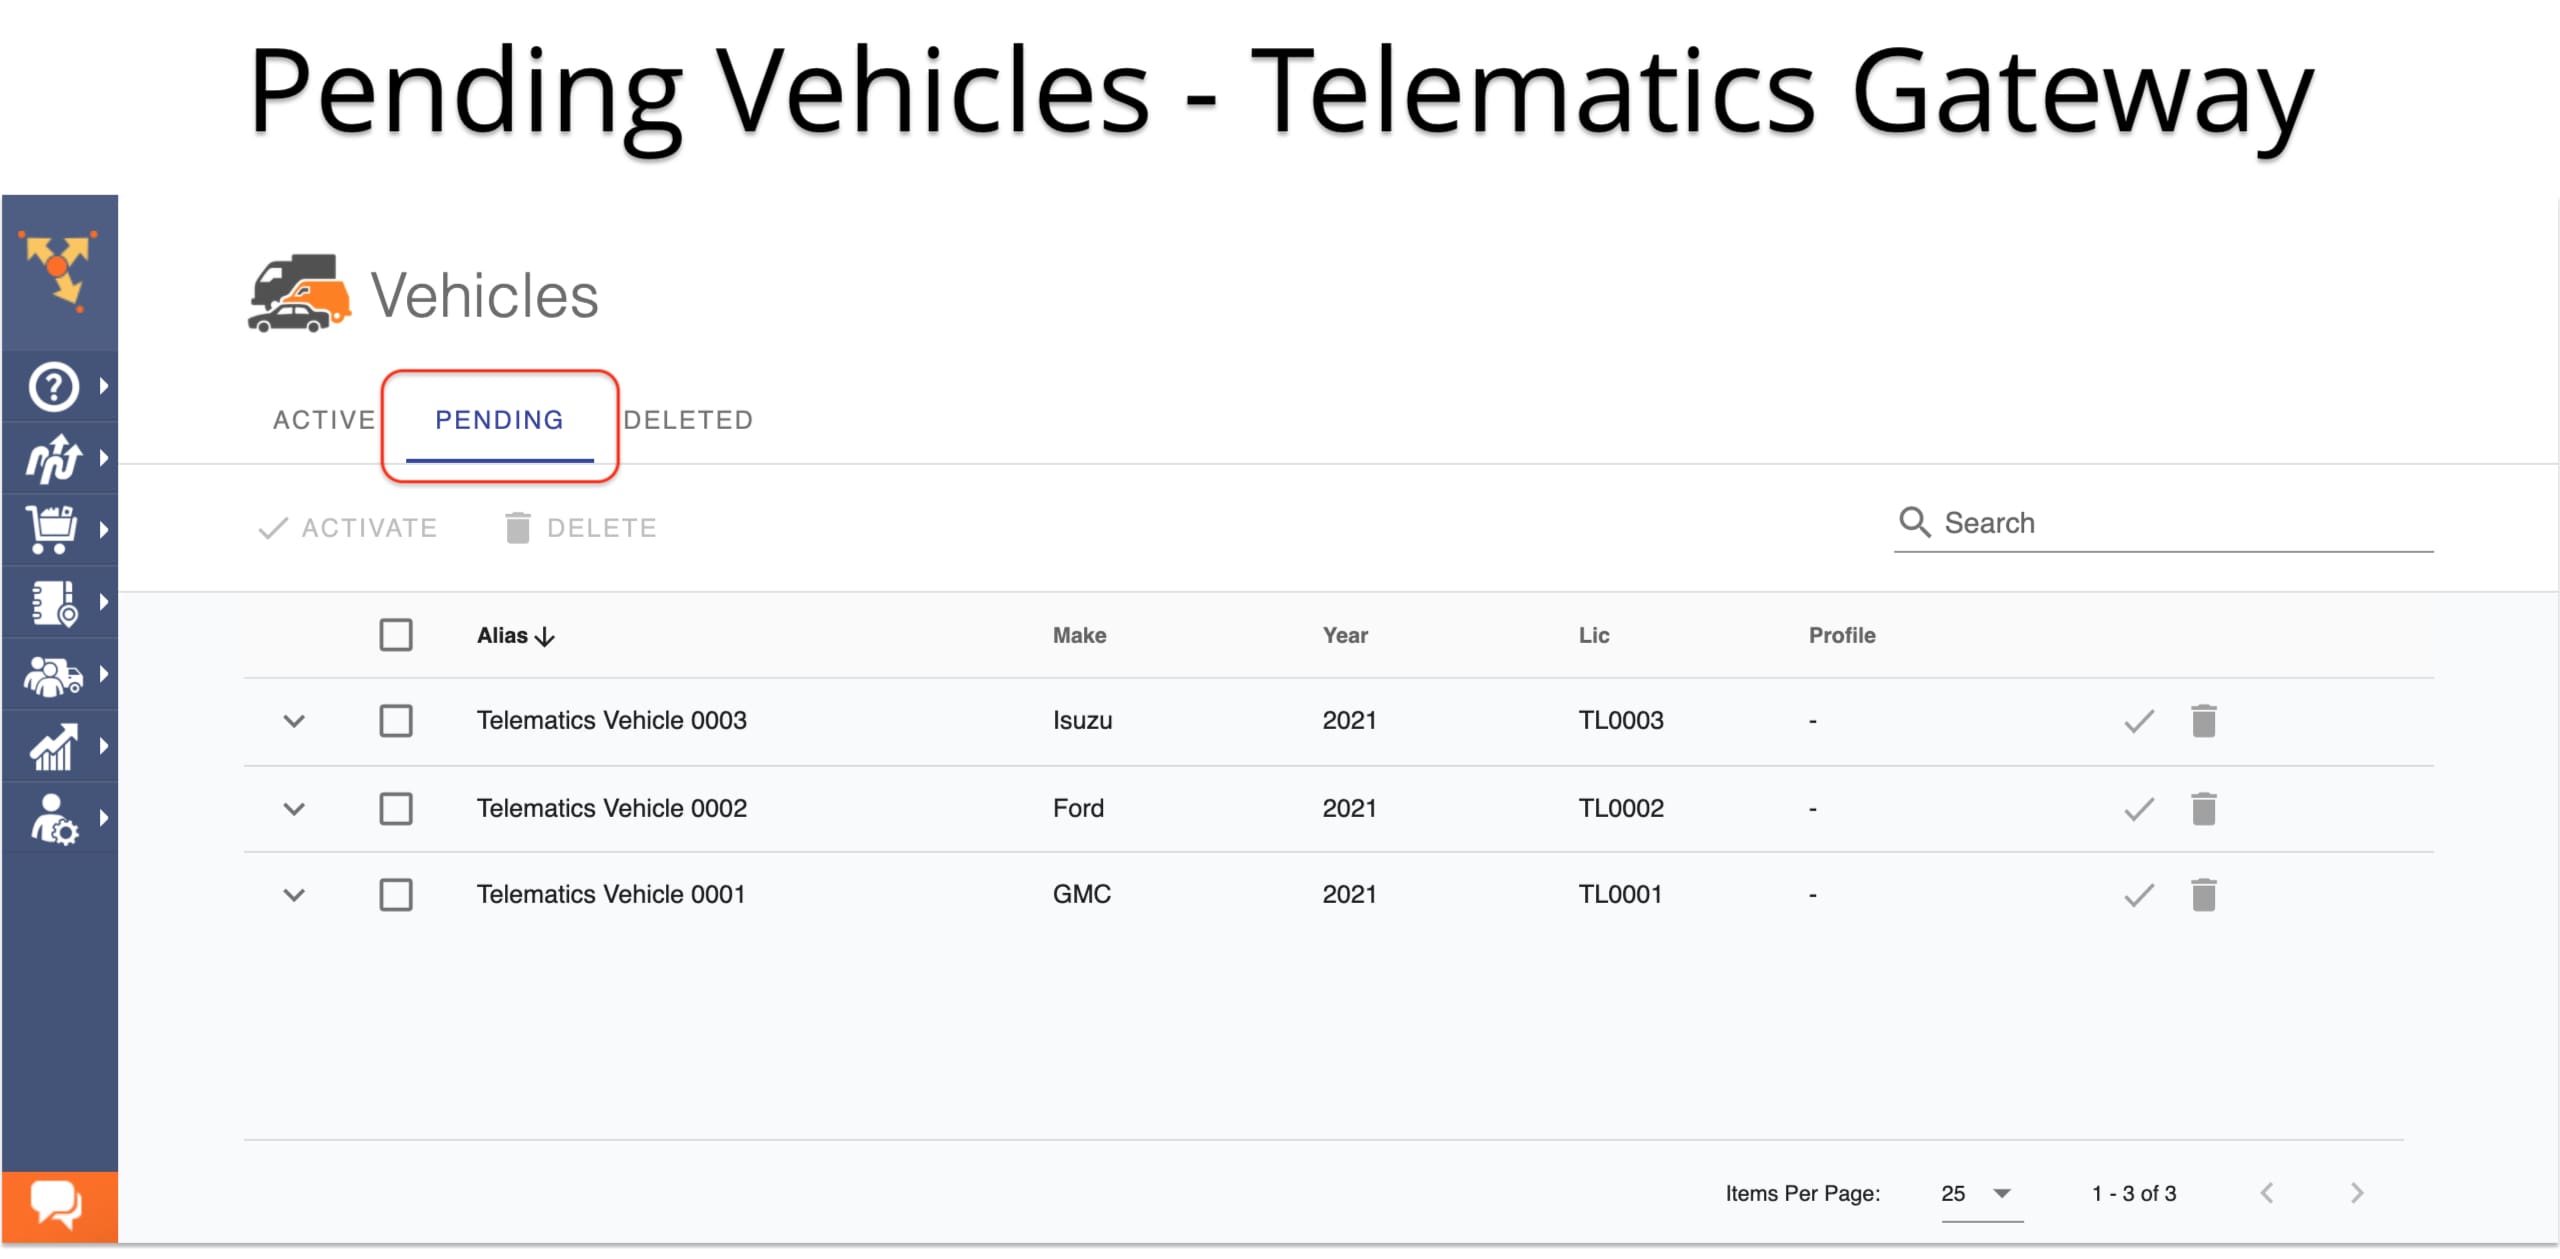 Pending vehicles are the vehicles imported into the Vehicle Editor using the telematics gateway.